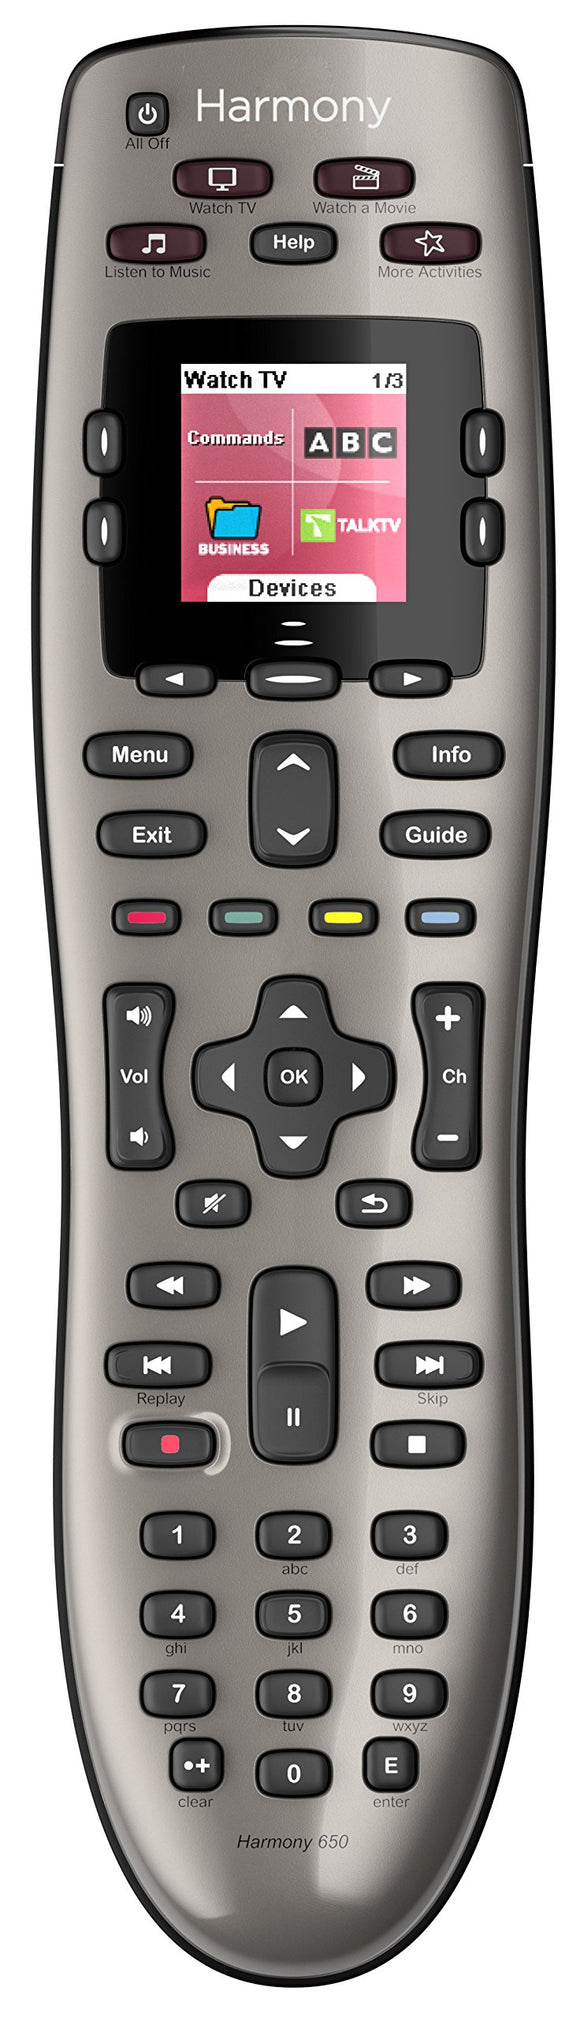 Refurbished Logitech Harmony 650 Infrared All in One Remote Control, Universal Remote Logitech, Programmable Remote (Silver)